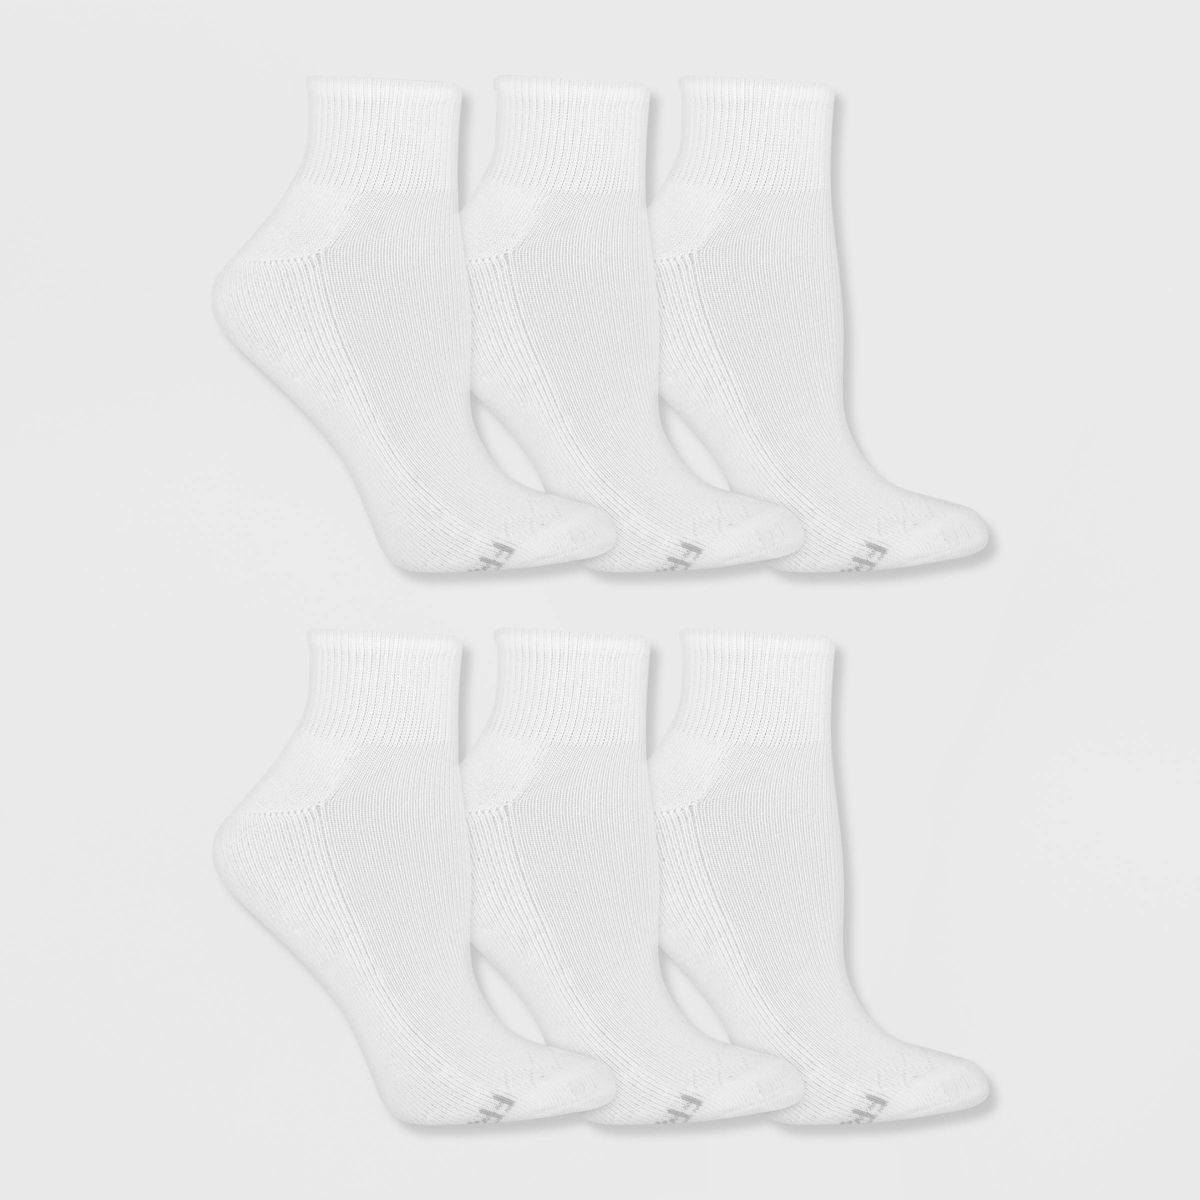 Fruit of the Loom Women's Cushioned 6pk Ankle Athletic Socks 4-10 | Target